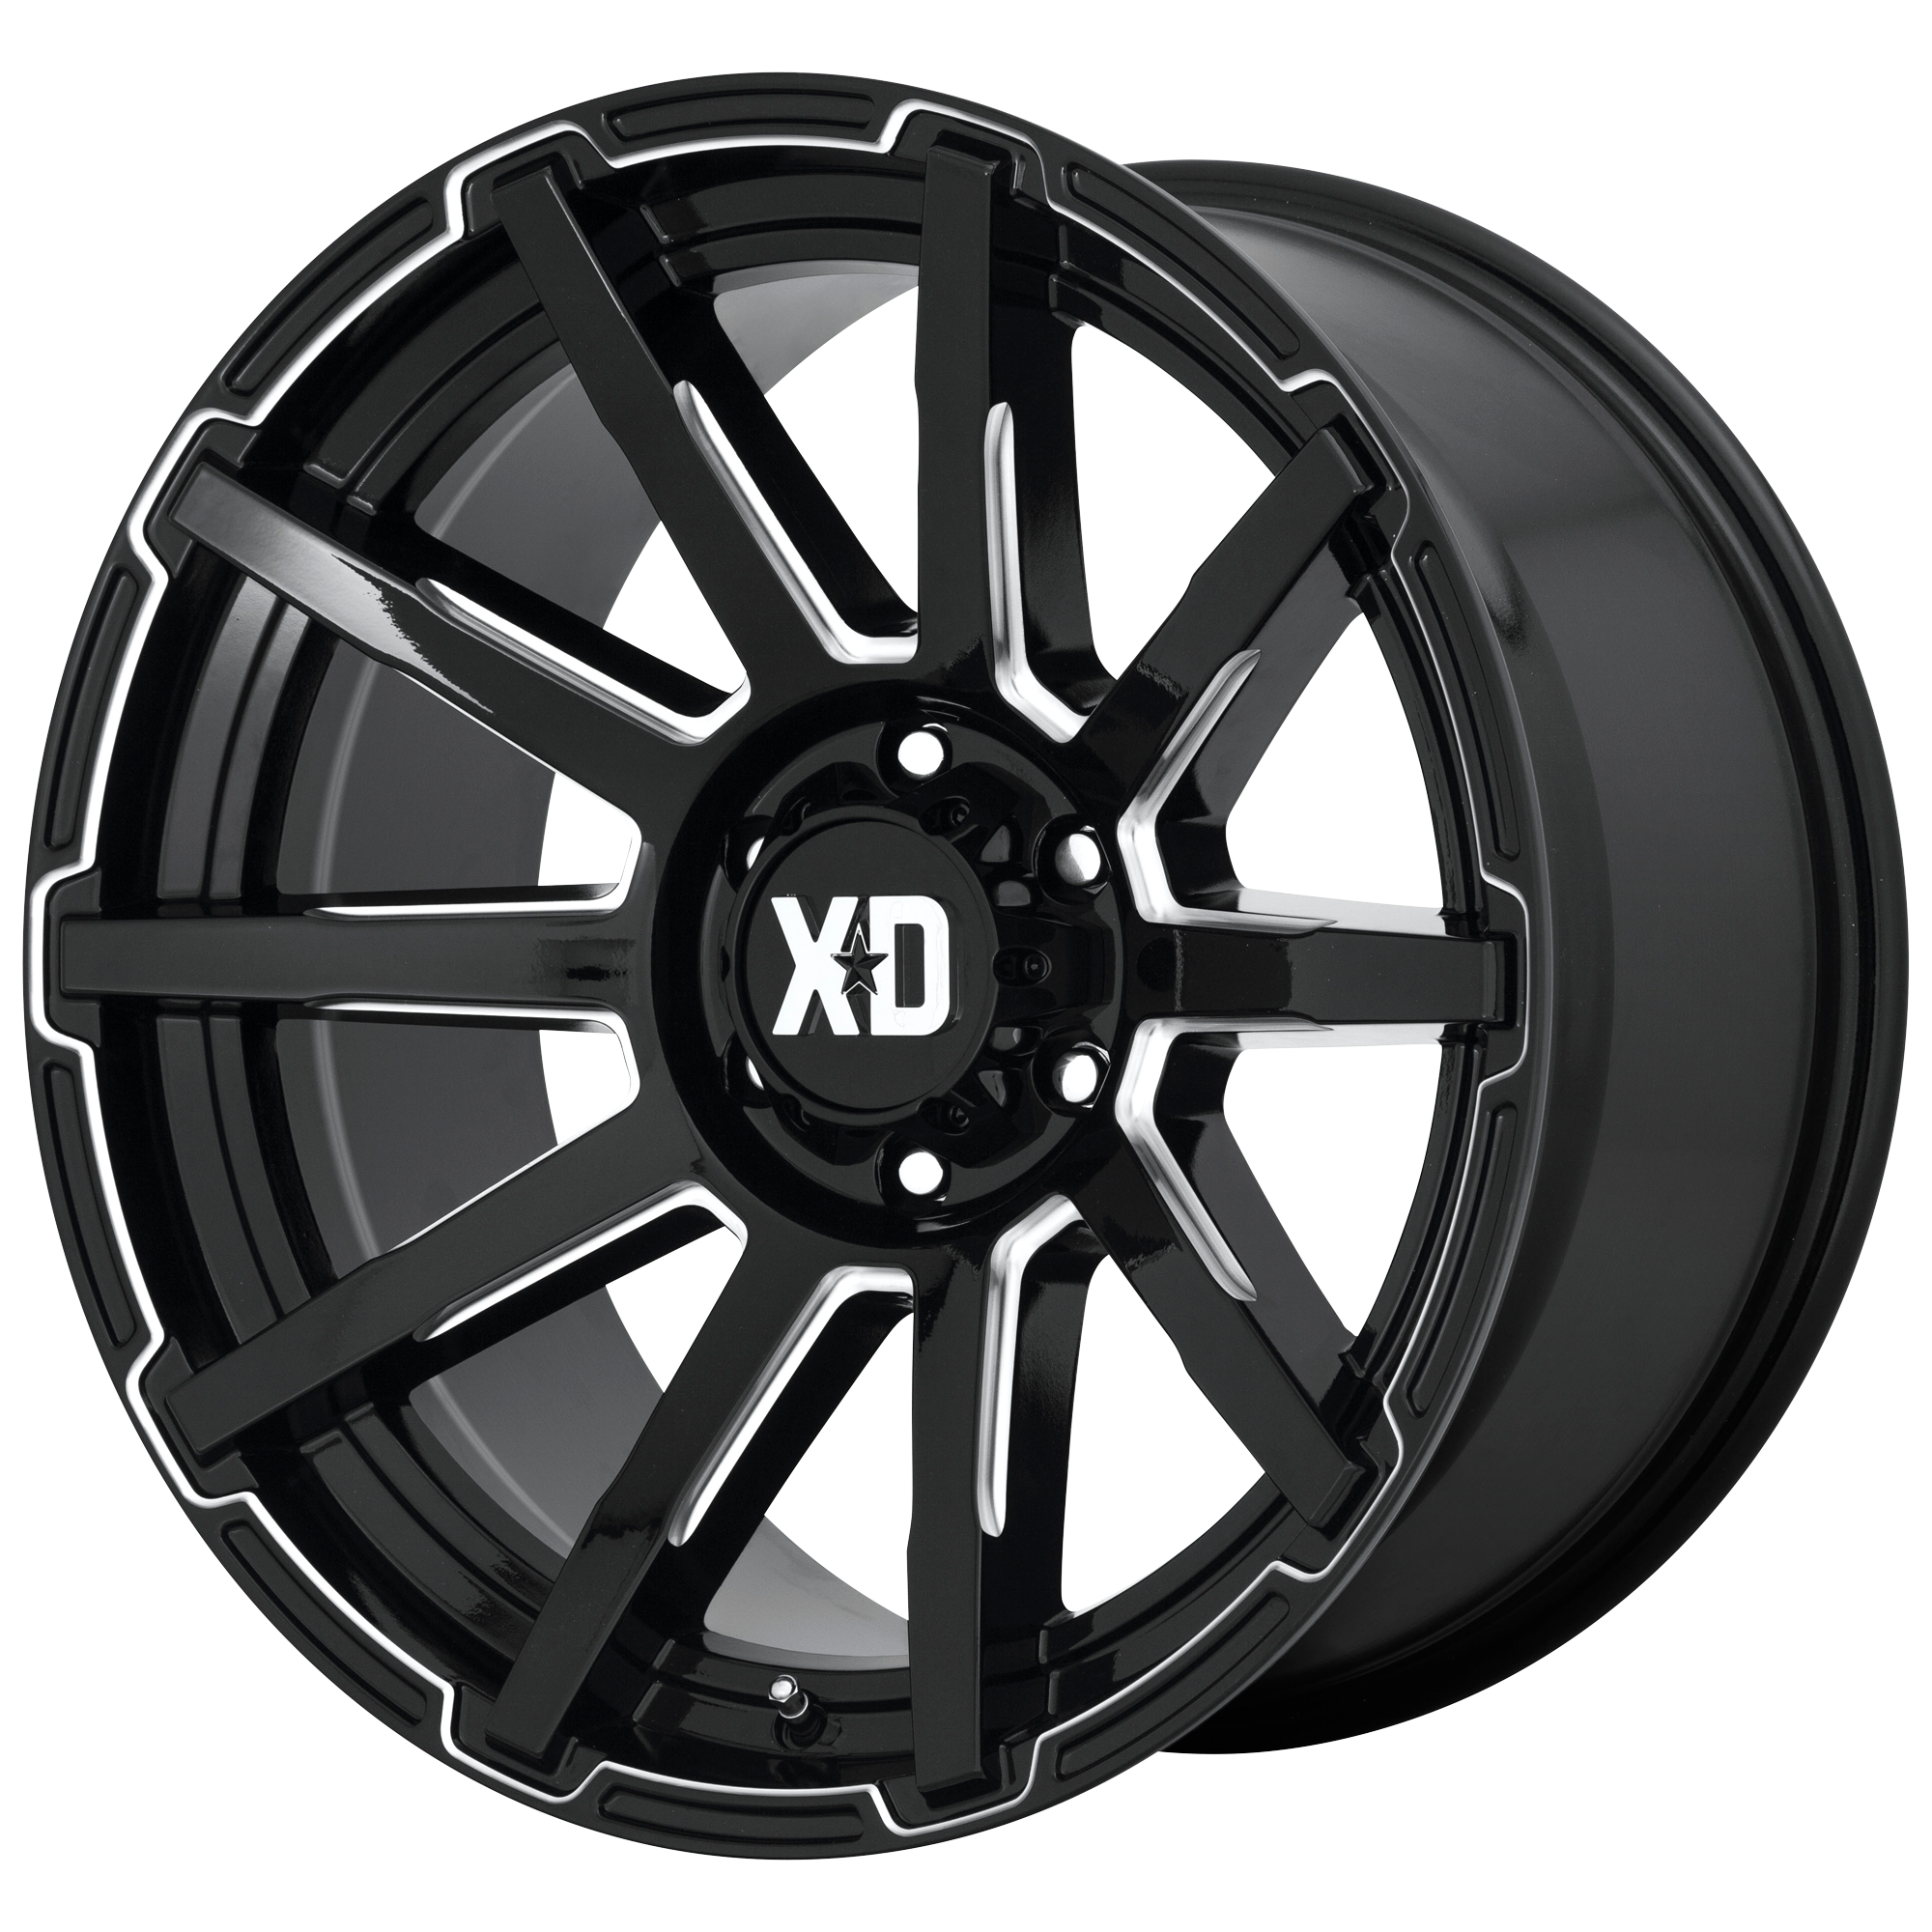 OUTBREAK 18x9 6x135.00 GLOSS BLACK MILLED (12 mm) - Tires and Engine Performance